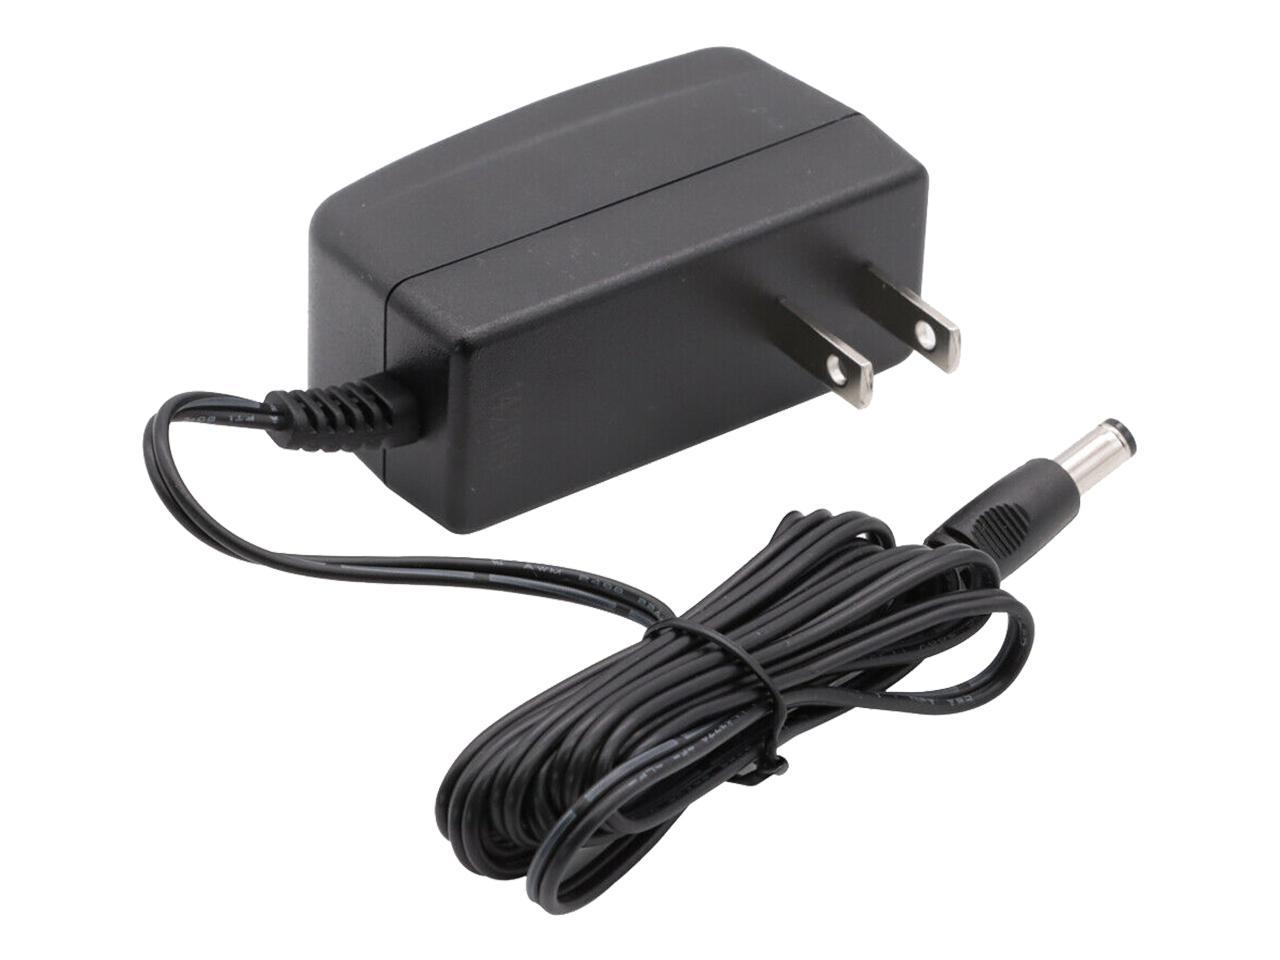 AC to DC 12V Power Supply Adapter Switching Barrel Plug 3.5mm x 1.35mm for Cameras DVR NVR LED Light Strip UL Listed FCC 